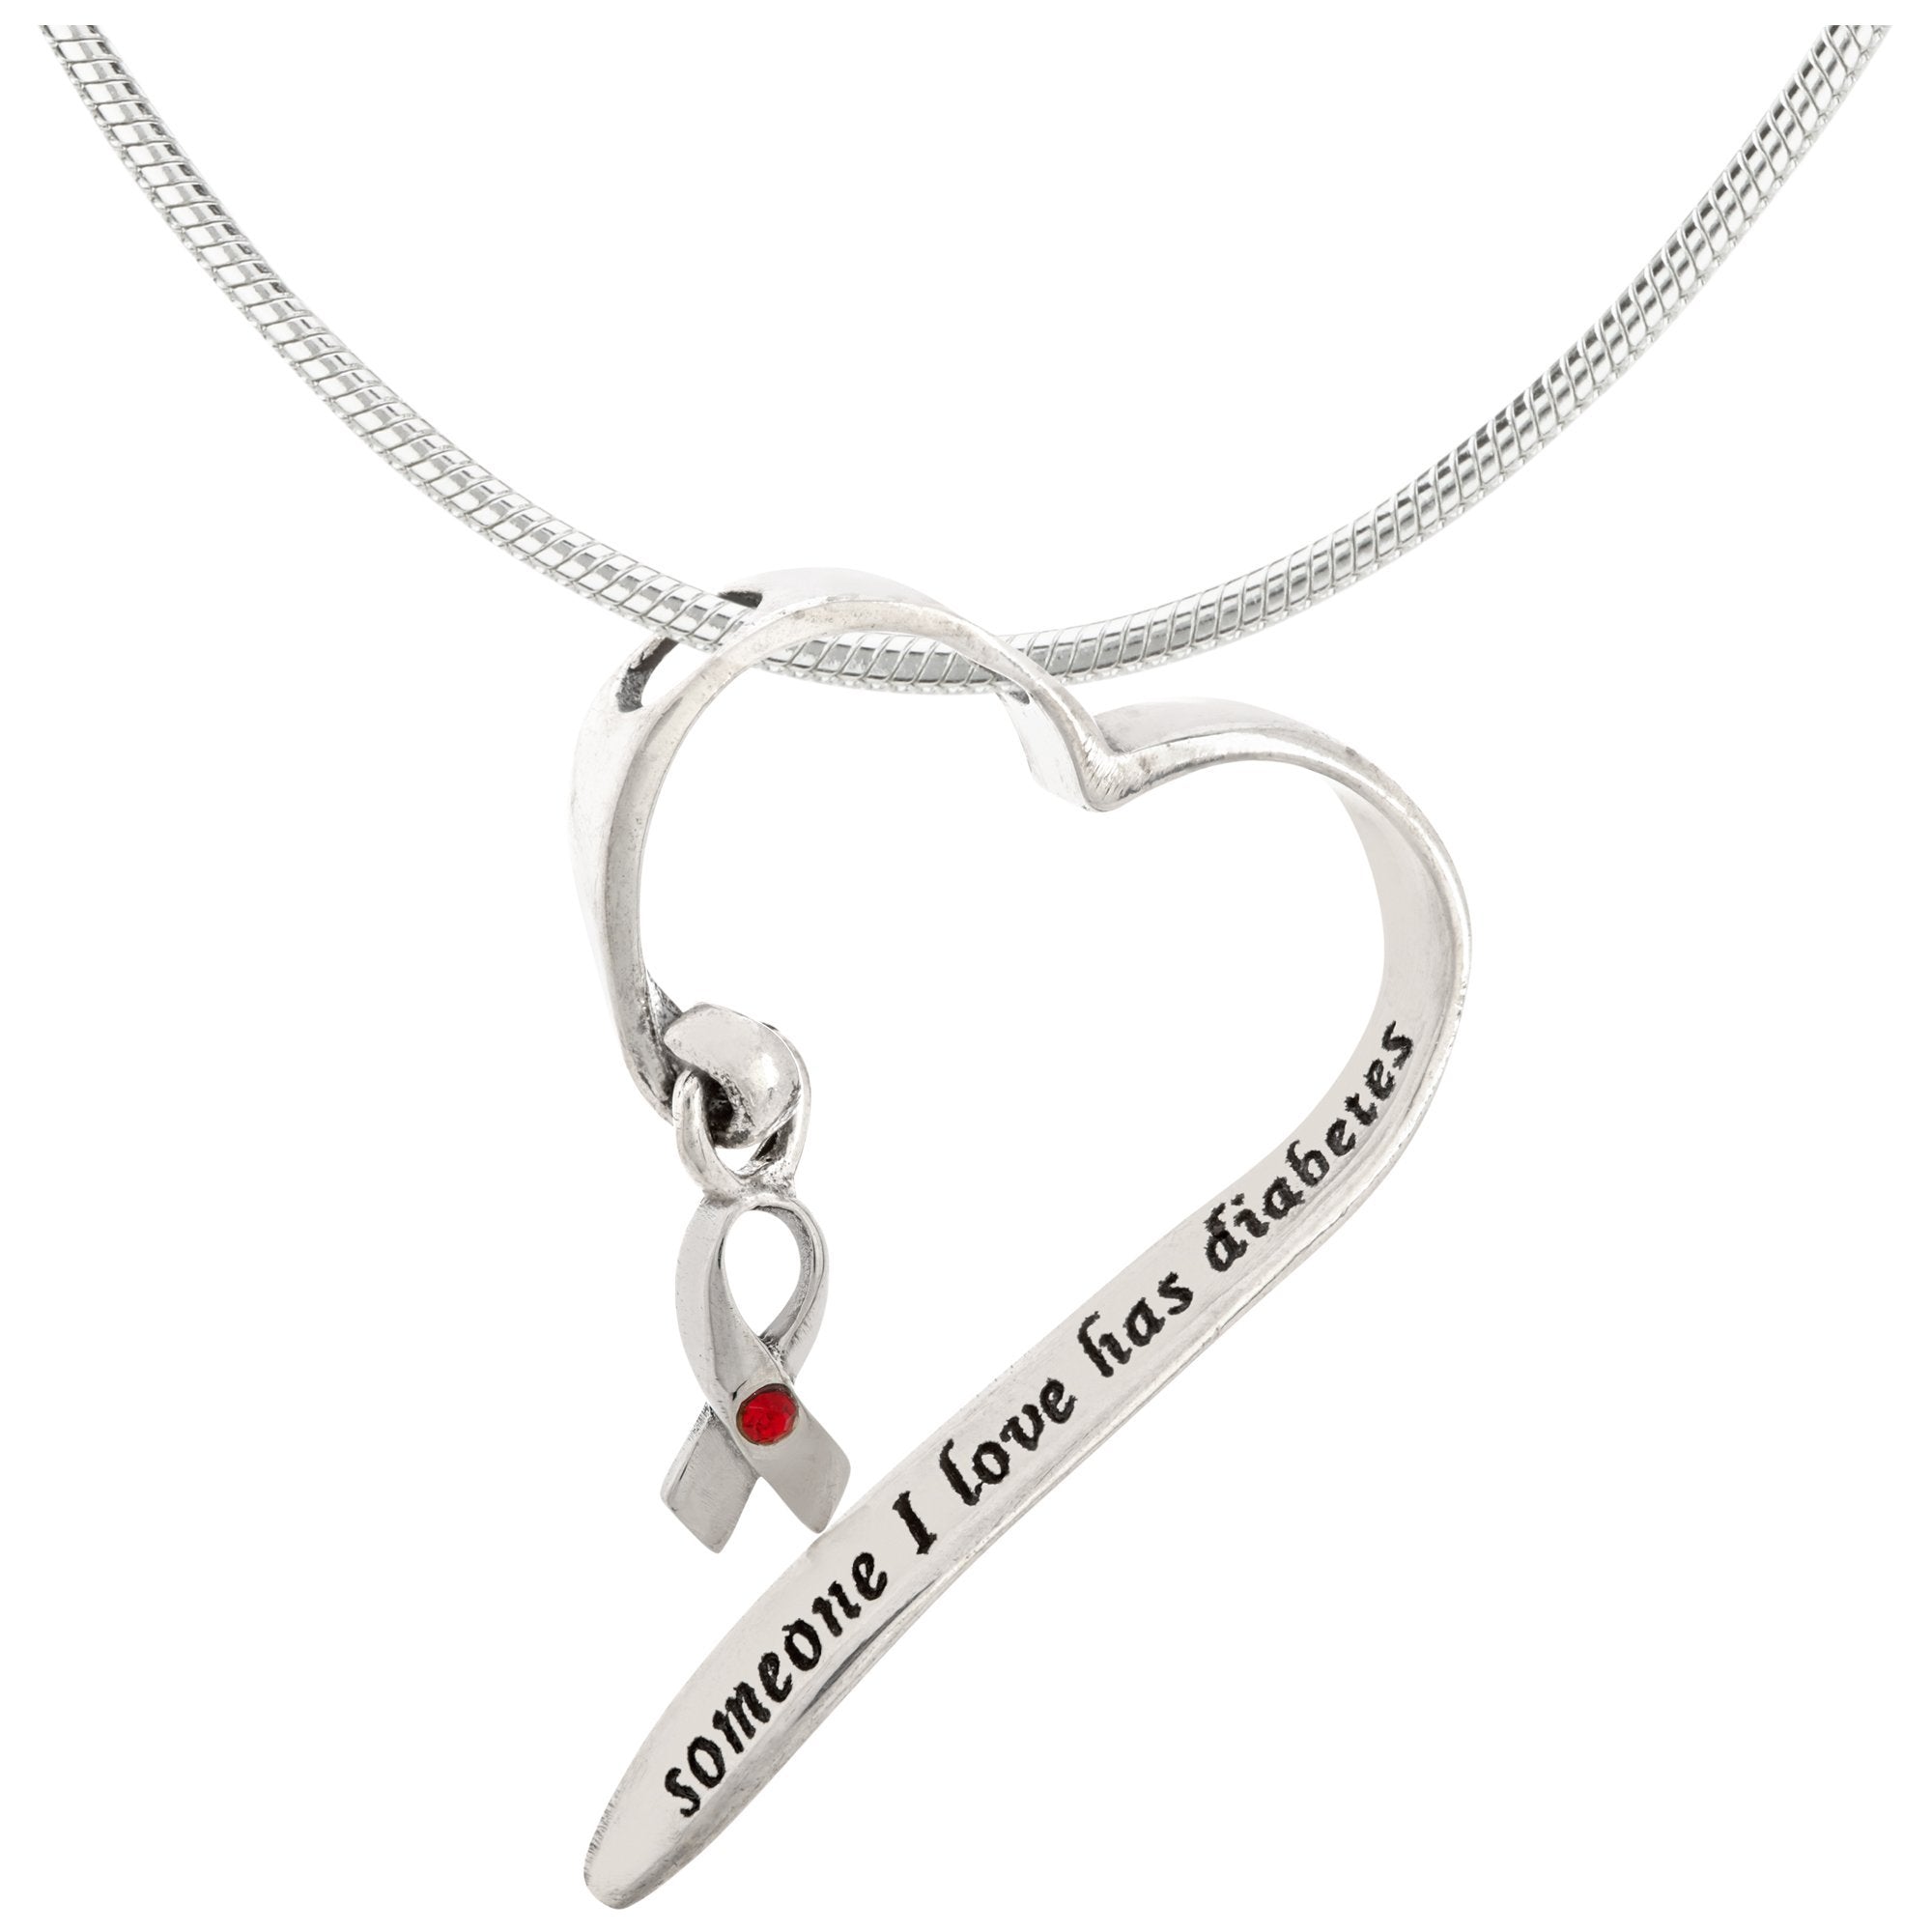 Someone I Love Has Diabetes Sterling Heart Necklace - With Diamond Cut Chain